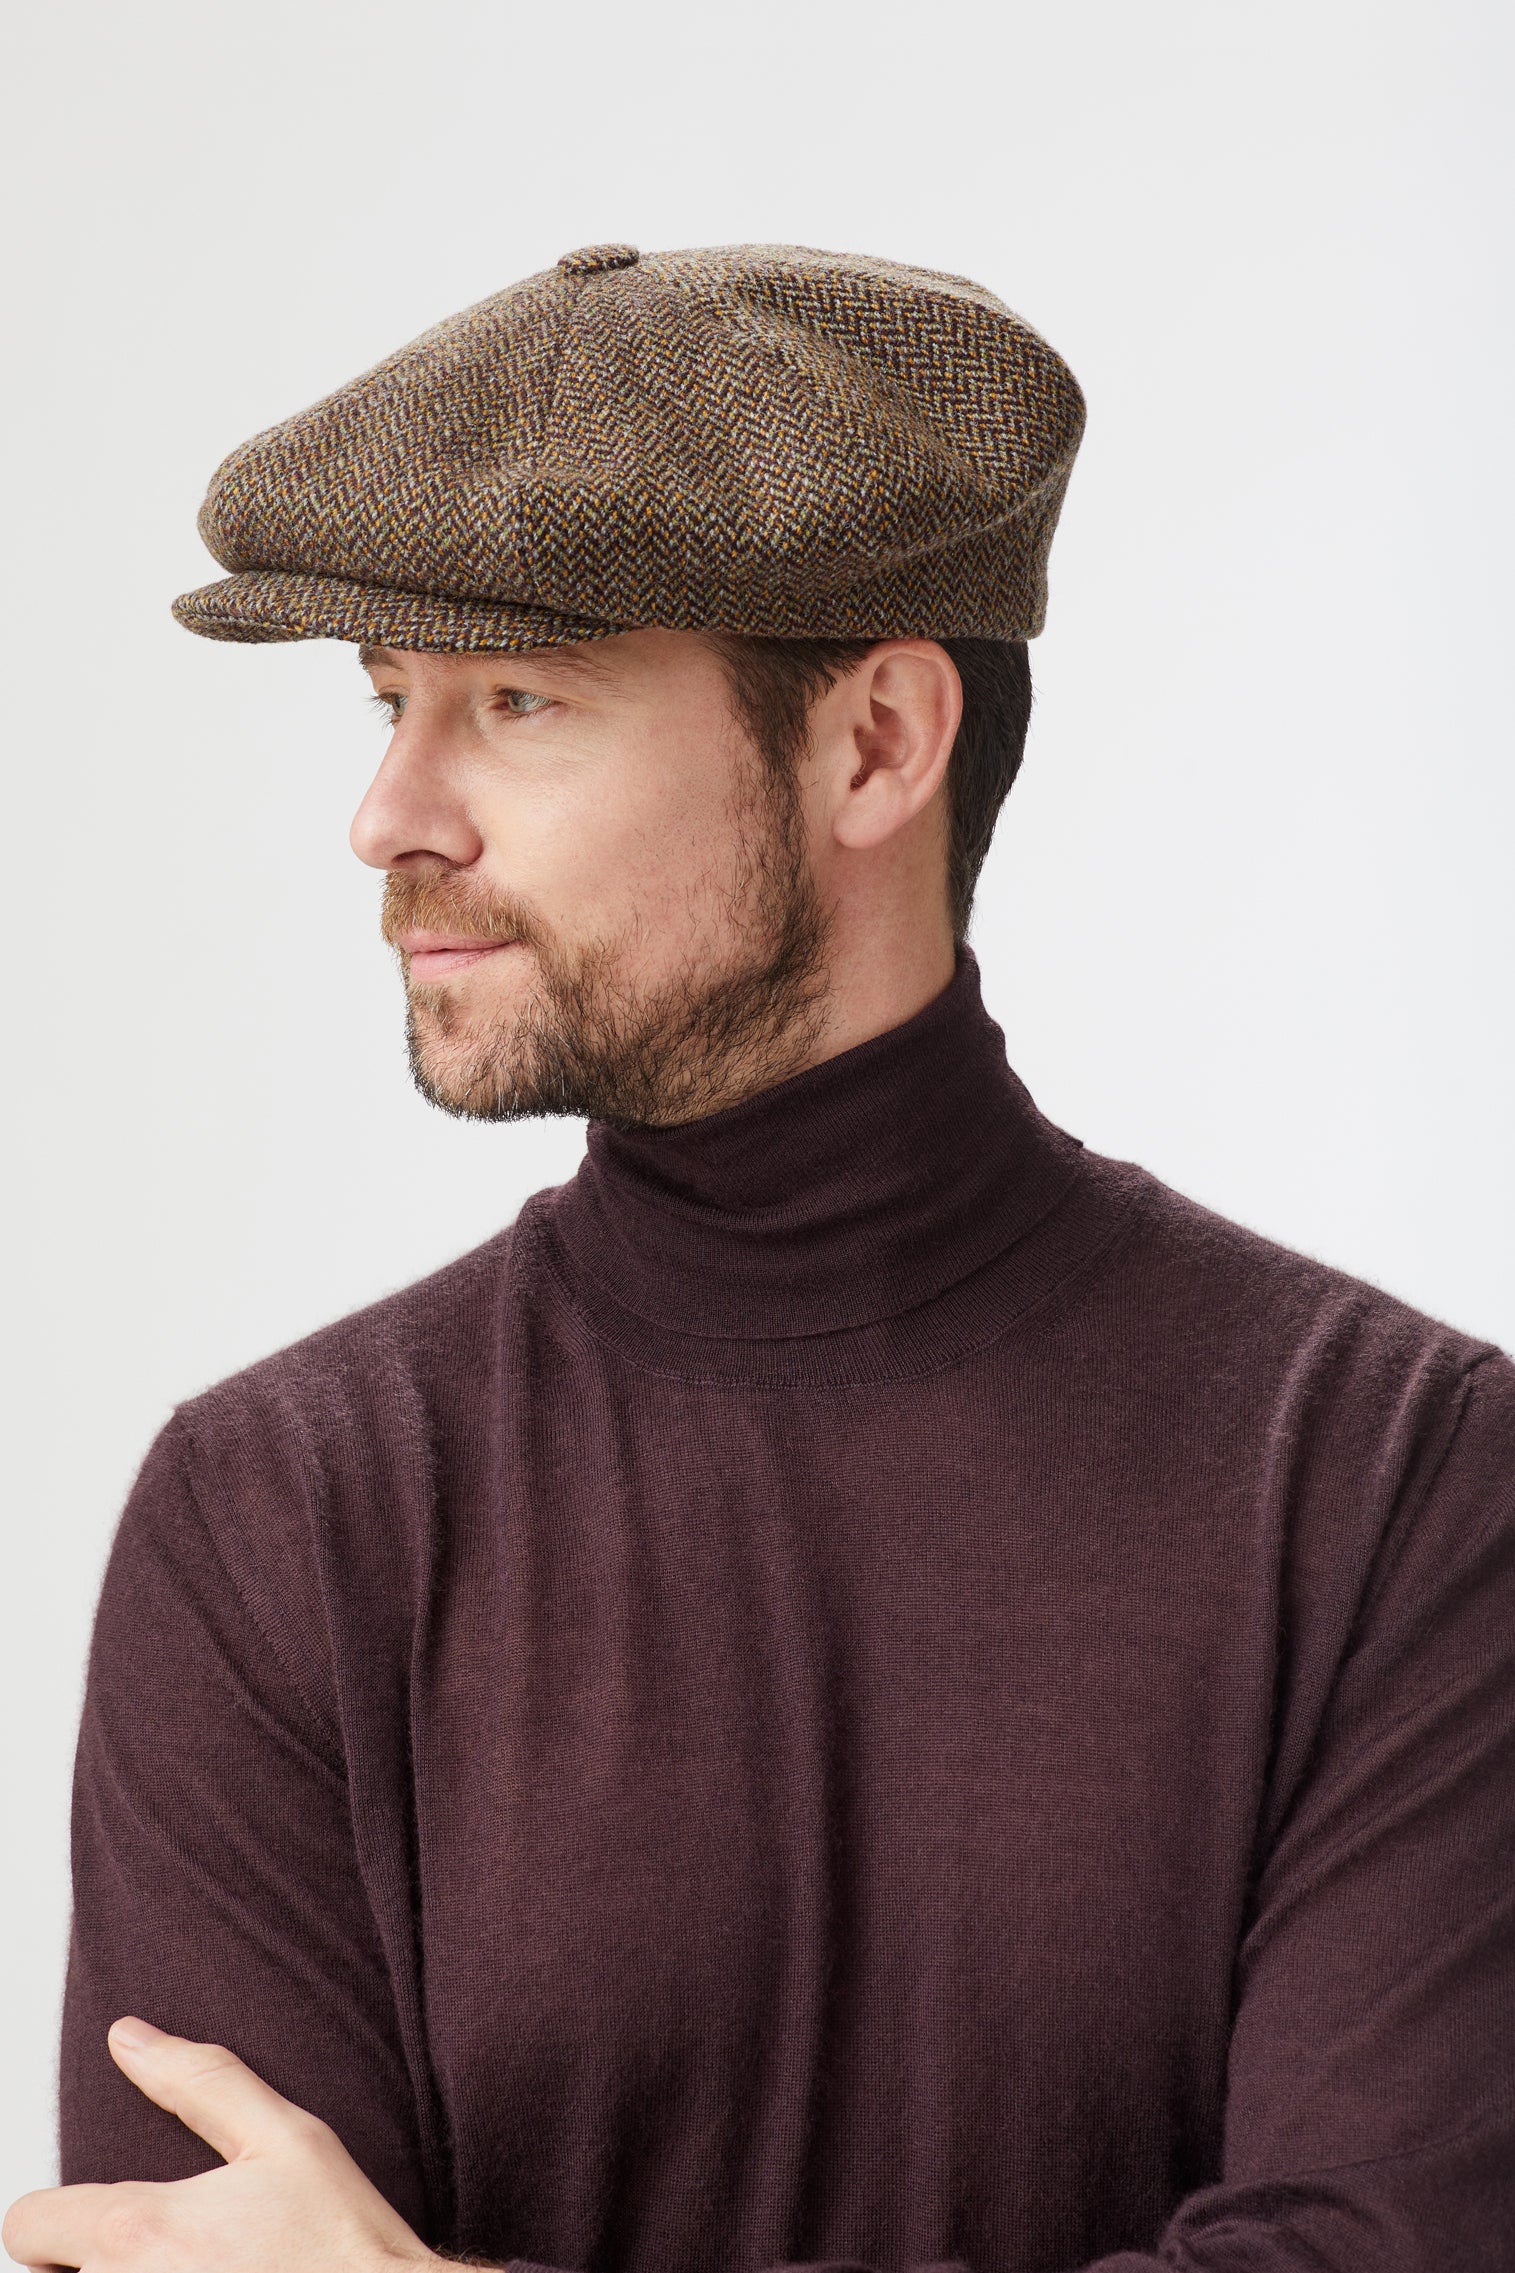 Sandwich Tweed Bakerboy Cap - Hats for Round Face Shapes - Lock & Co. Hatters London UK